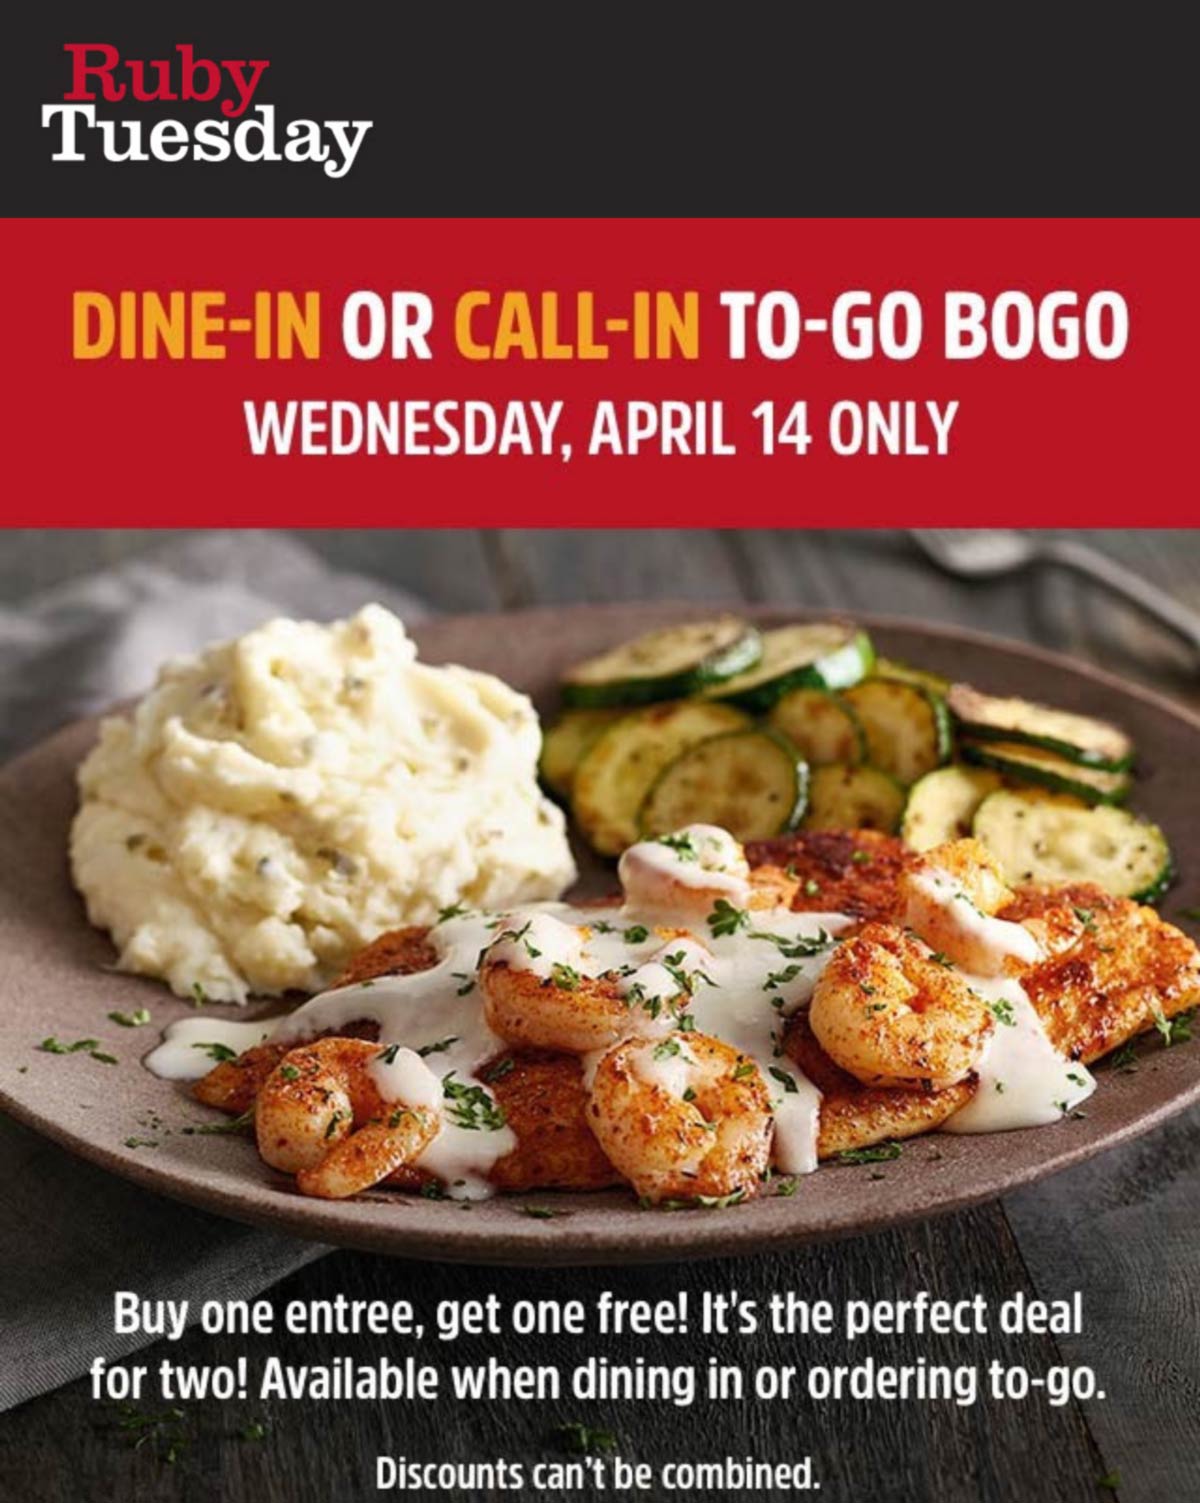 Ruby Tuesday restaurants Coupon  Second entree free today at Ruby Tuesday #rubytuesday 